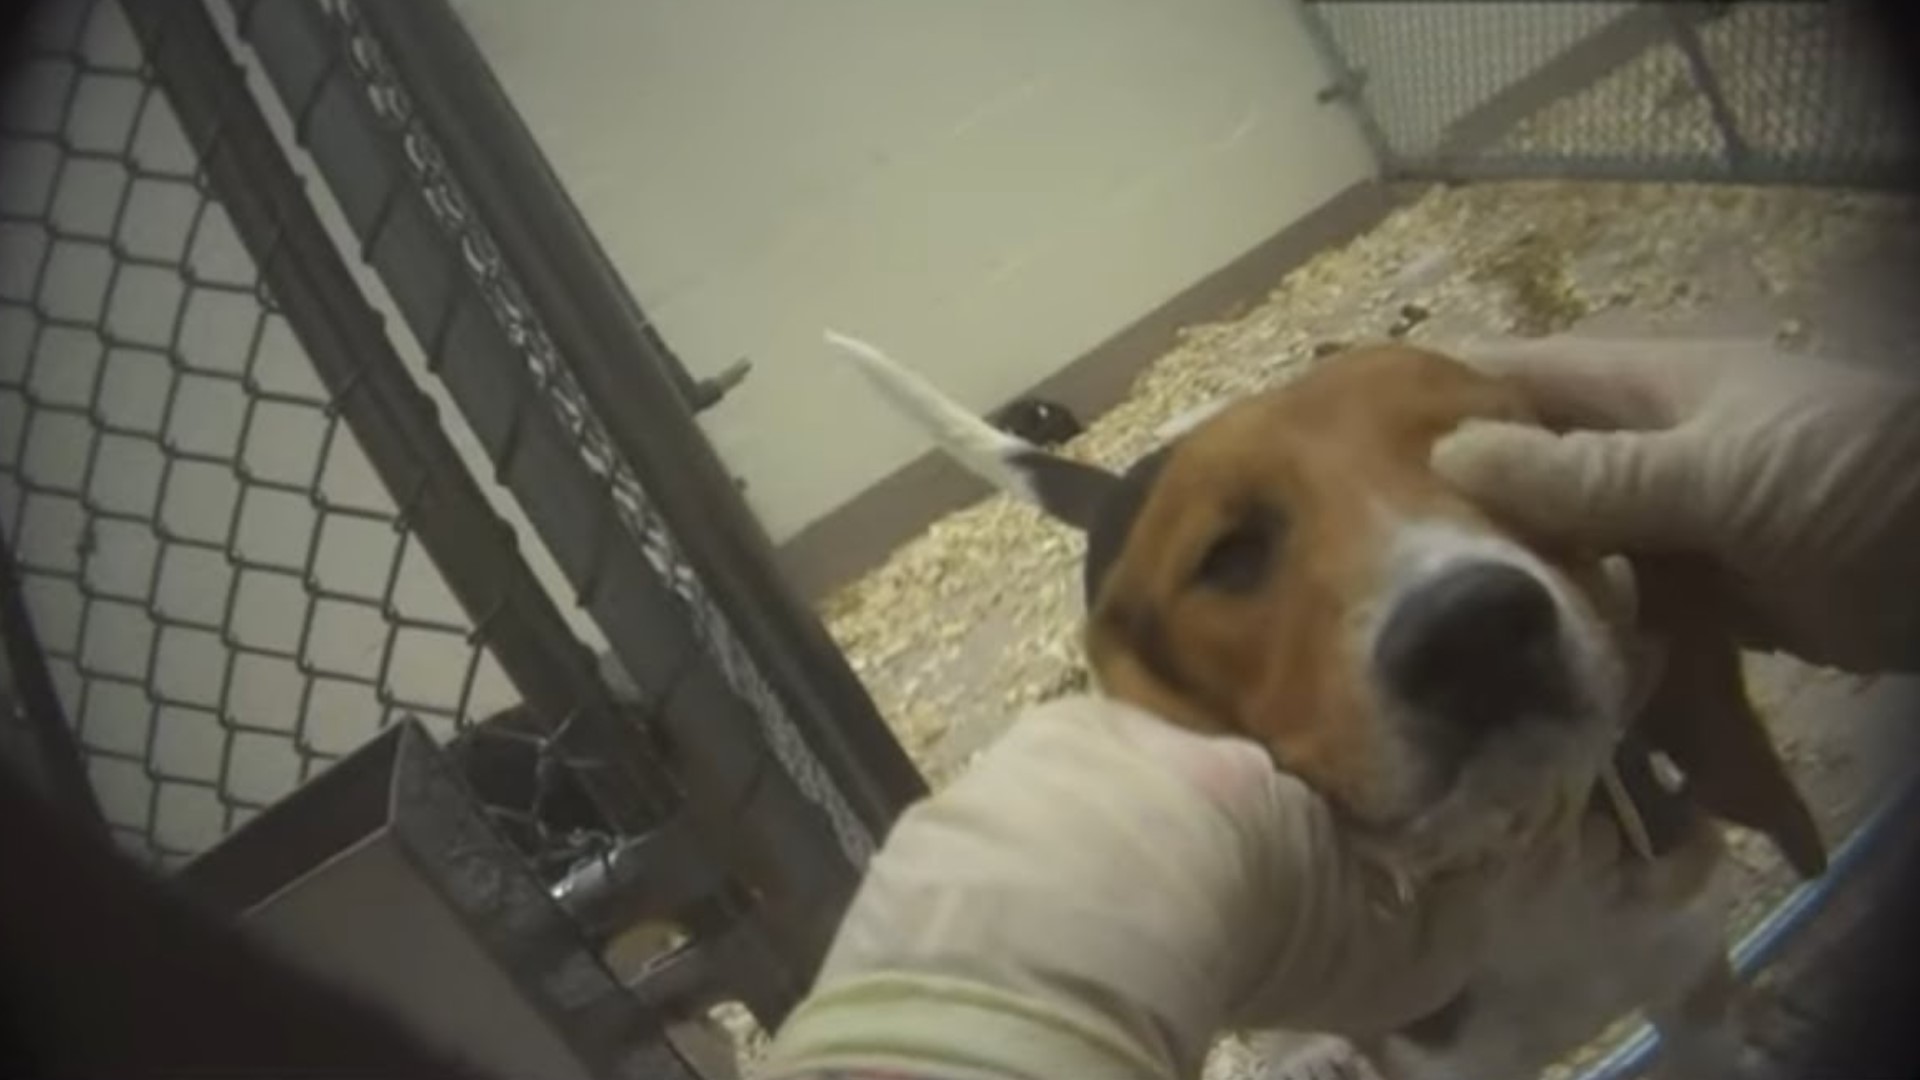 The Humane Society is working to end scientific testing on dogs.